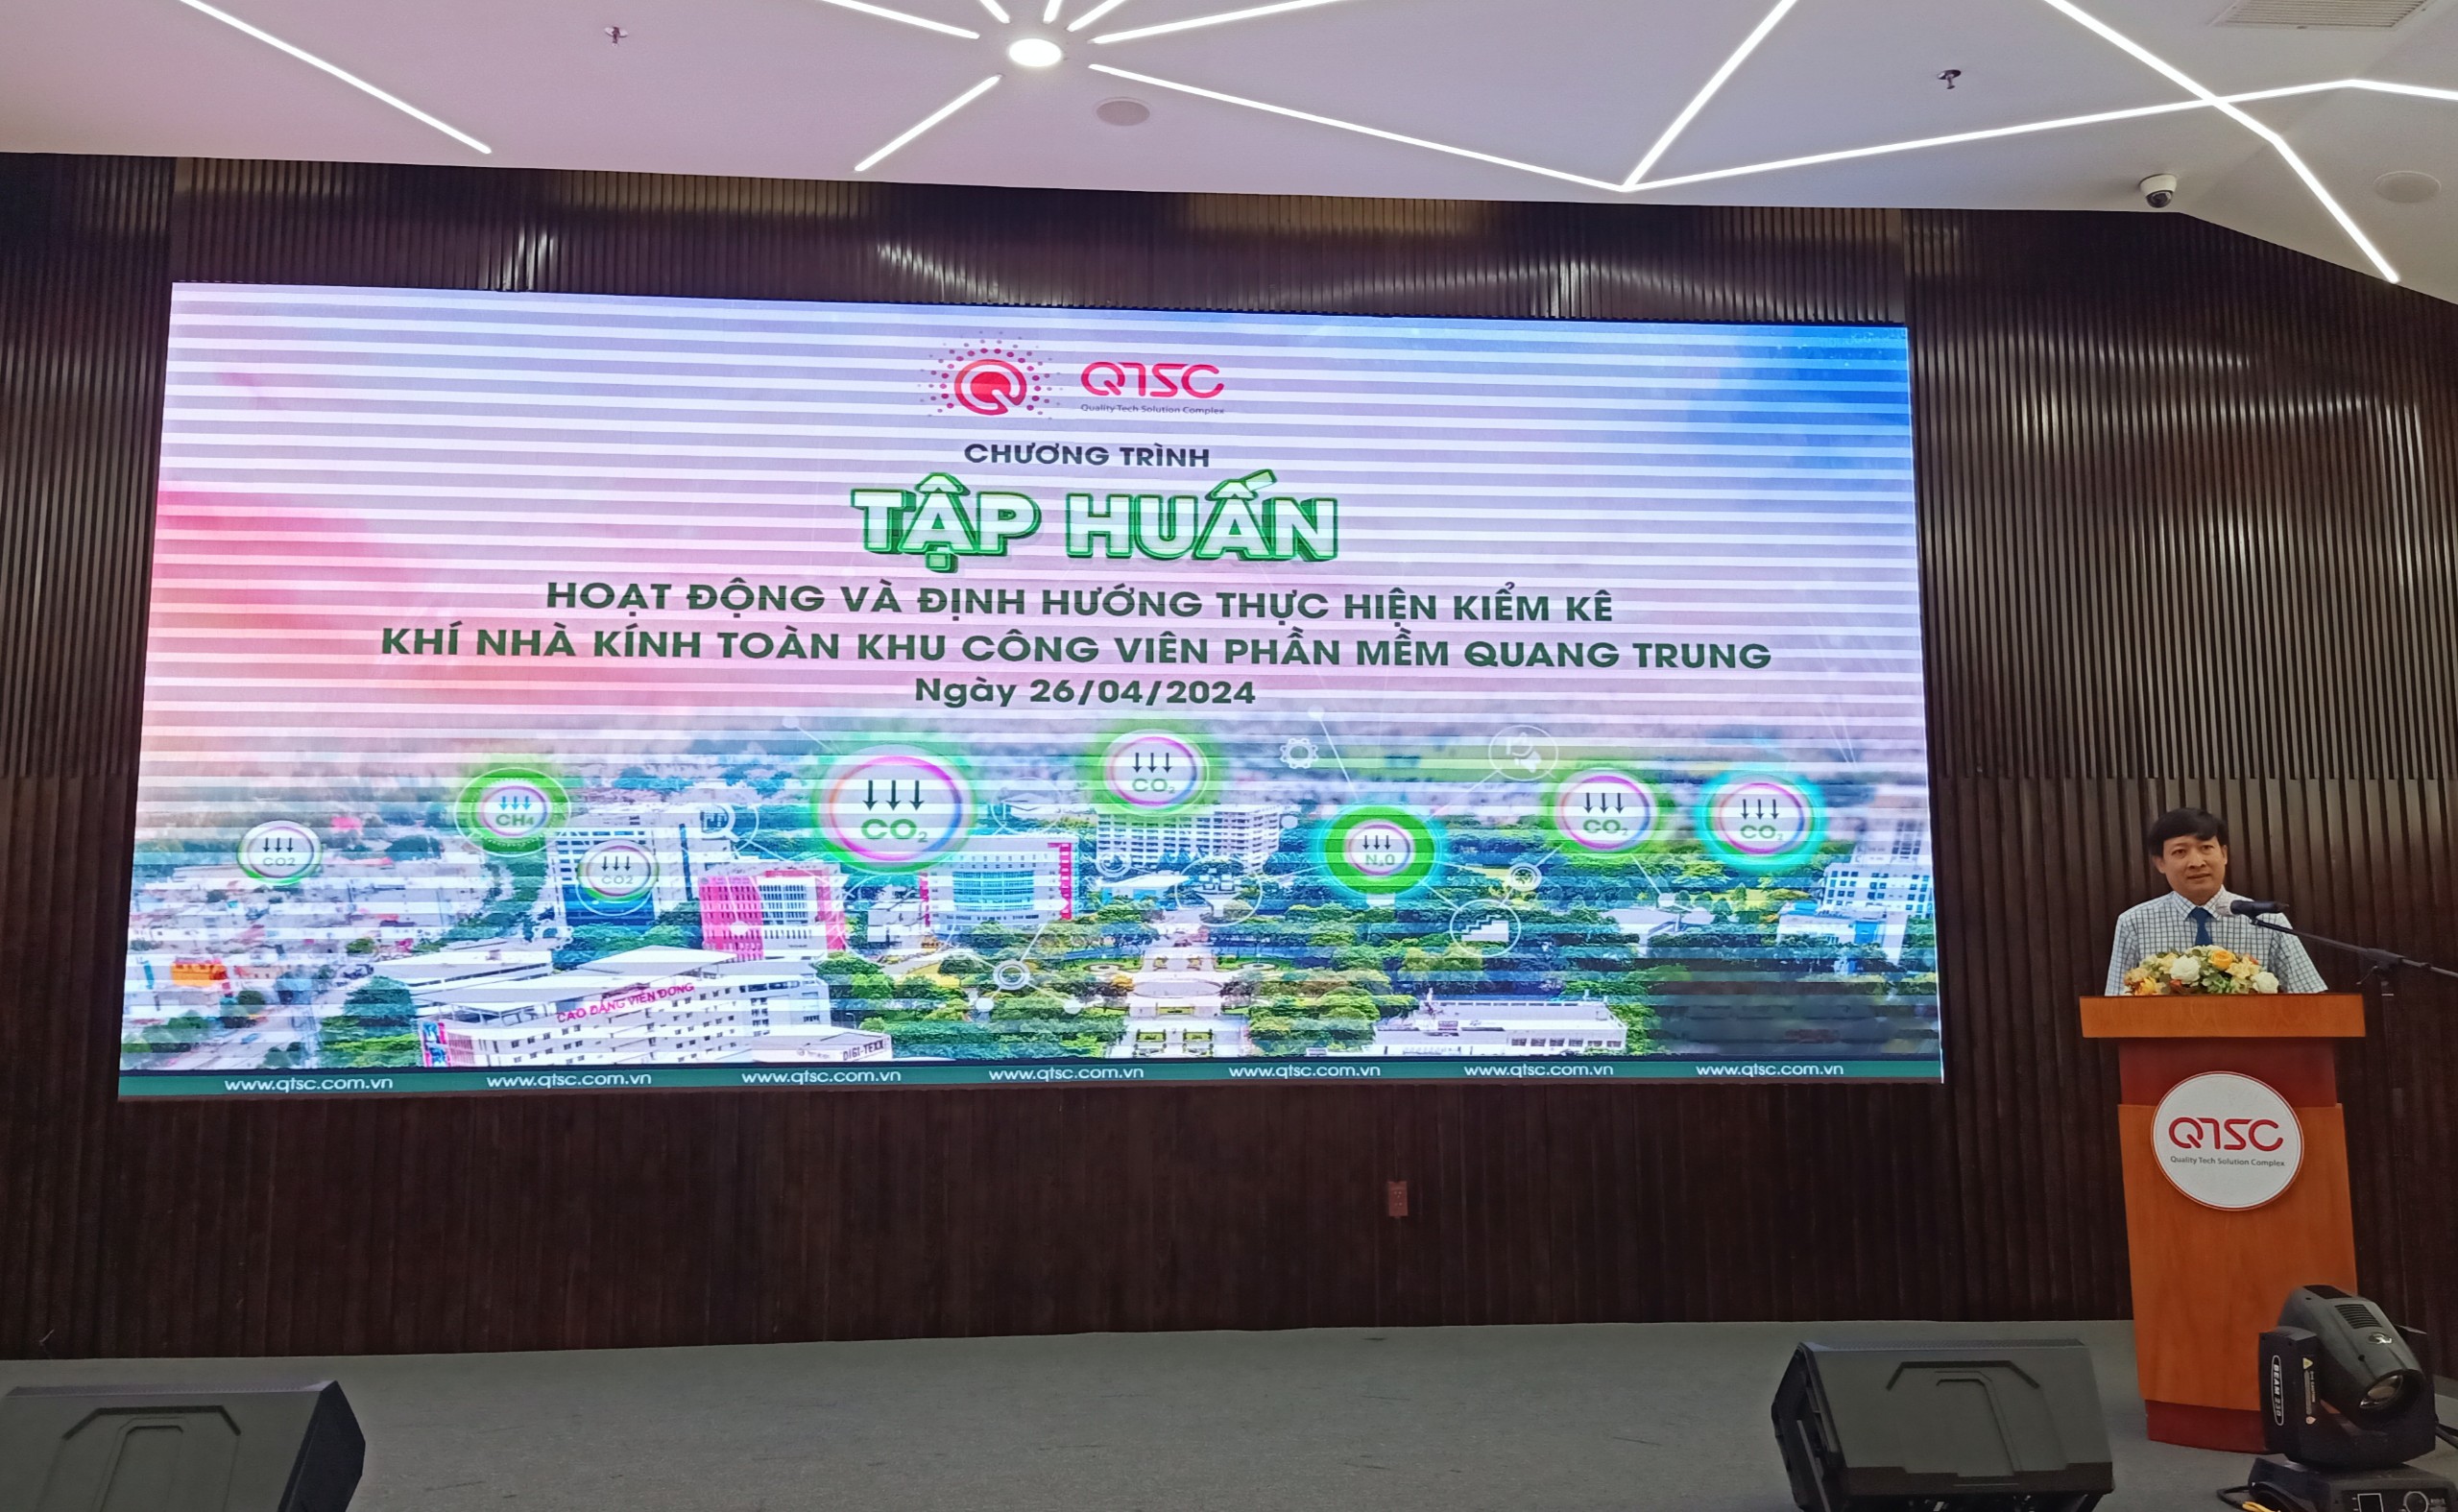 Mr. Huynh Tan Dat, GHG expert, Director of Le Huynh Environmental Technology Company Limited, introduced the training topics